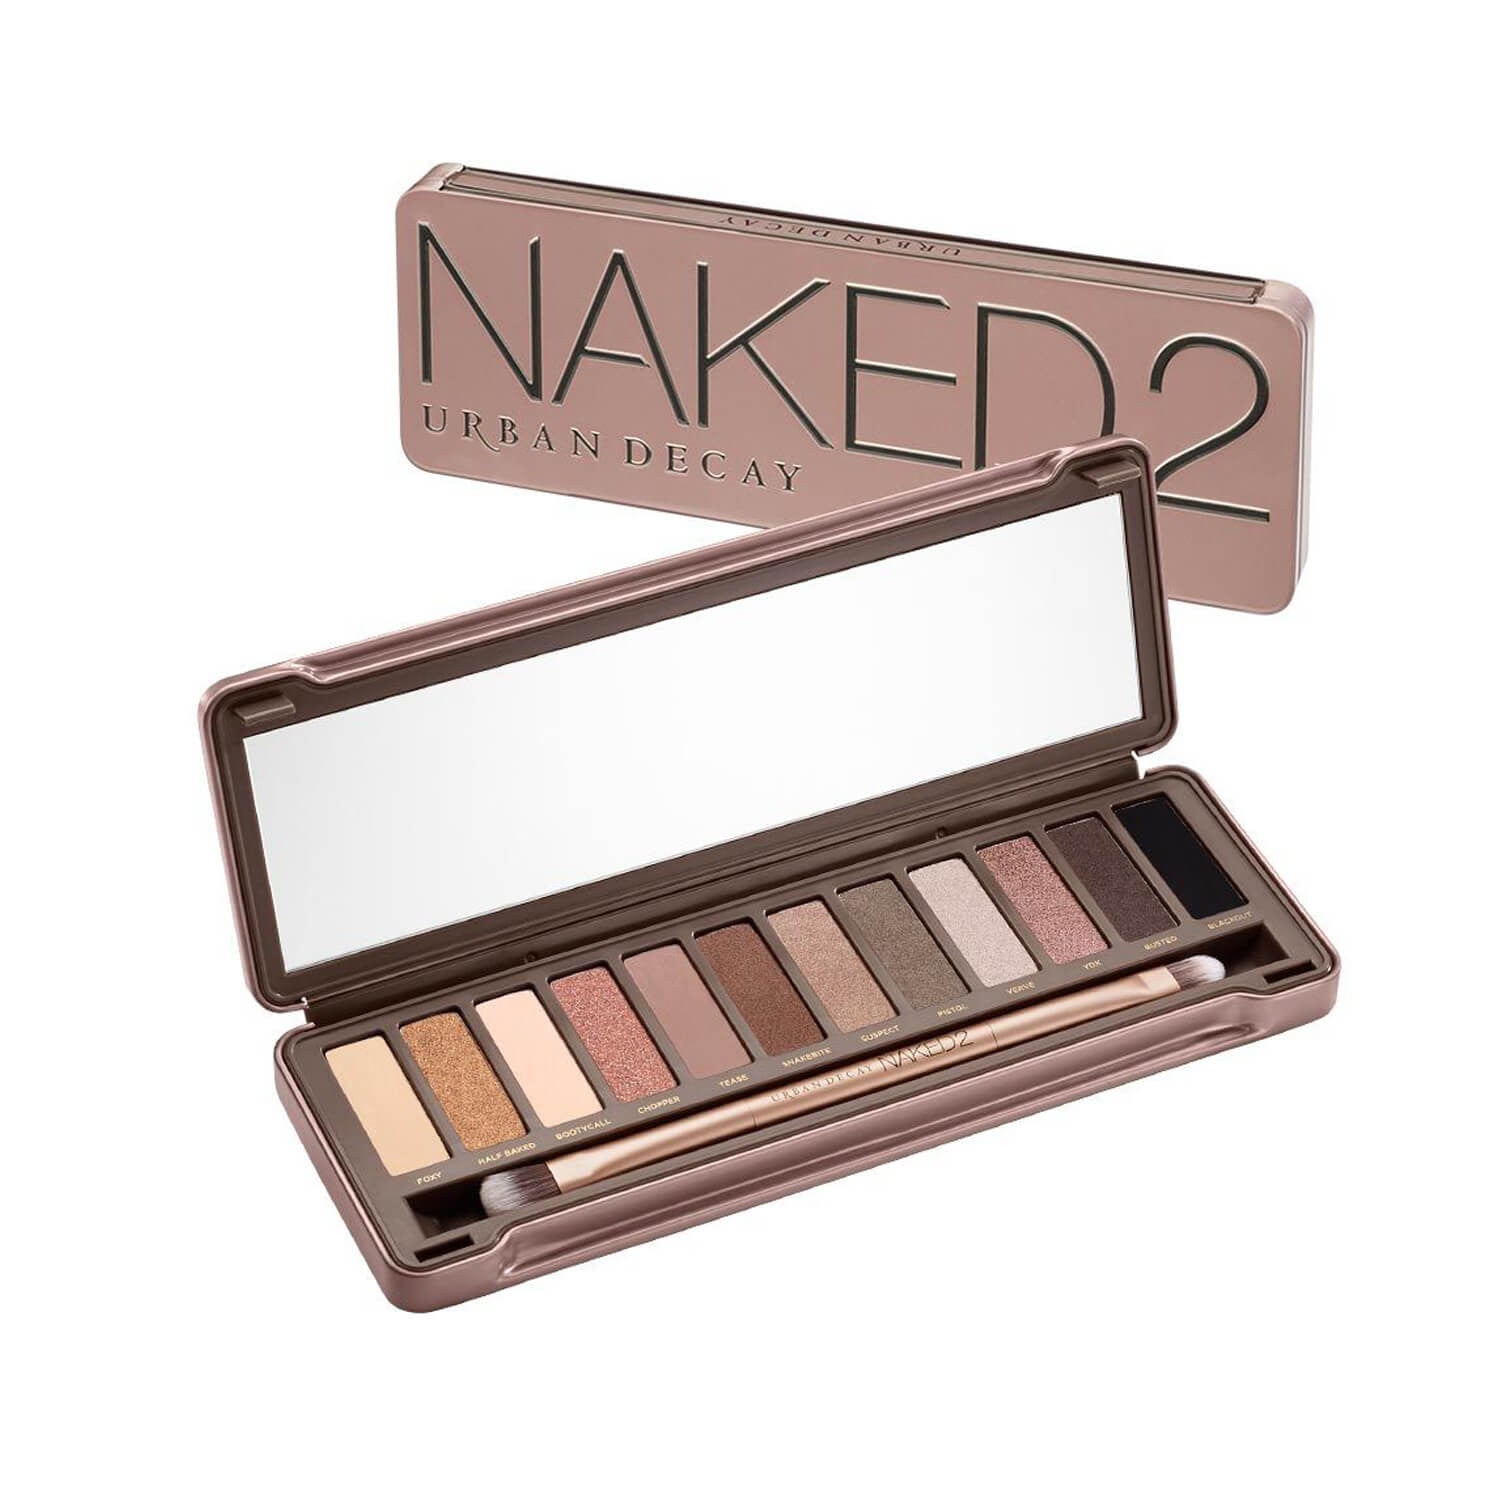 Urban Decay Naked Eyeshadow Palette & Reviews - Makeup 